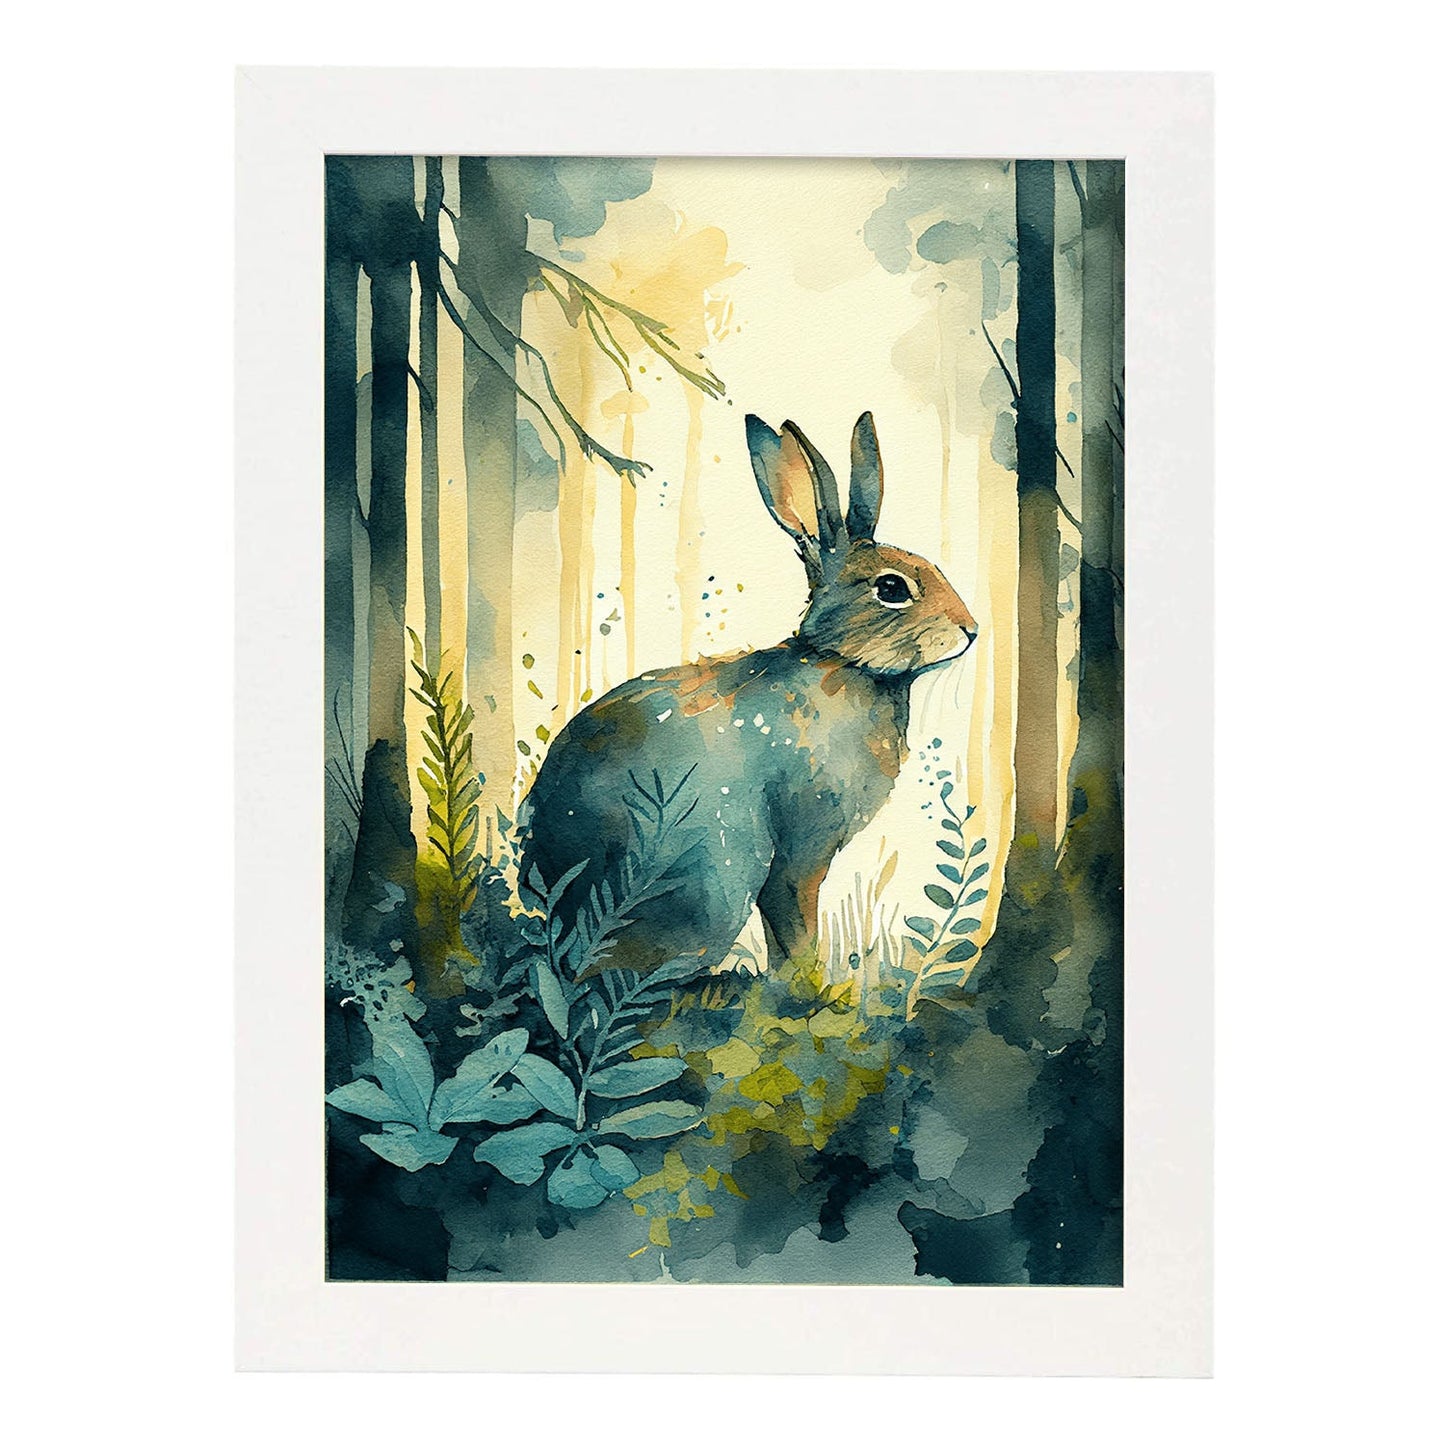 Nacnic Watercolor of Bunny in the forest_2. Aesthetic Wall Art Prints for Bedroom or Living Room Design.